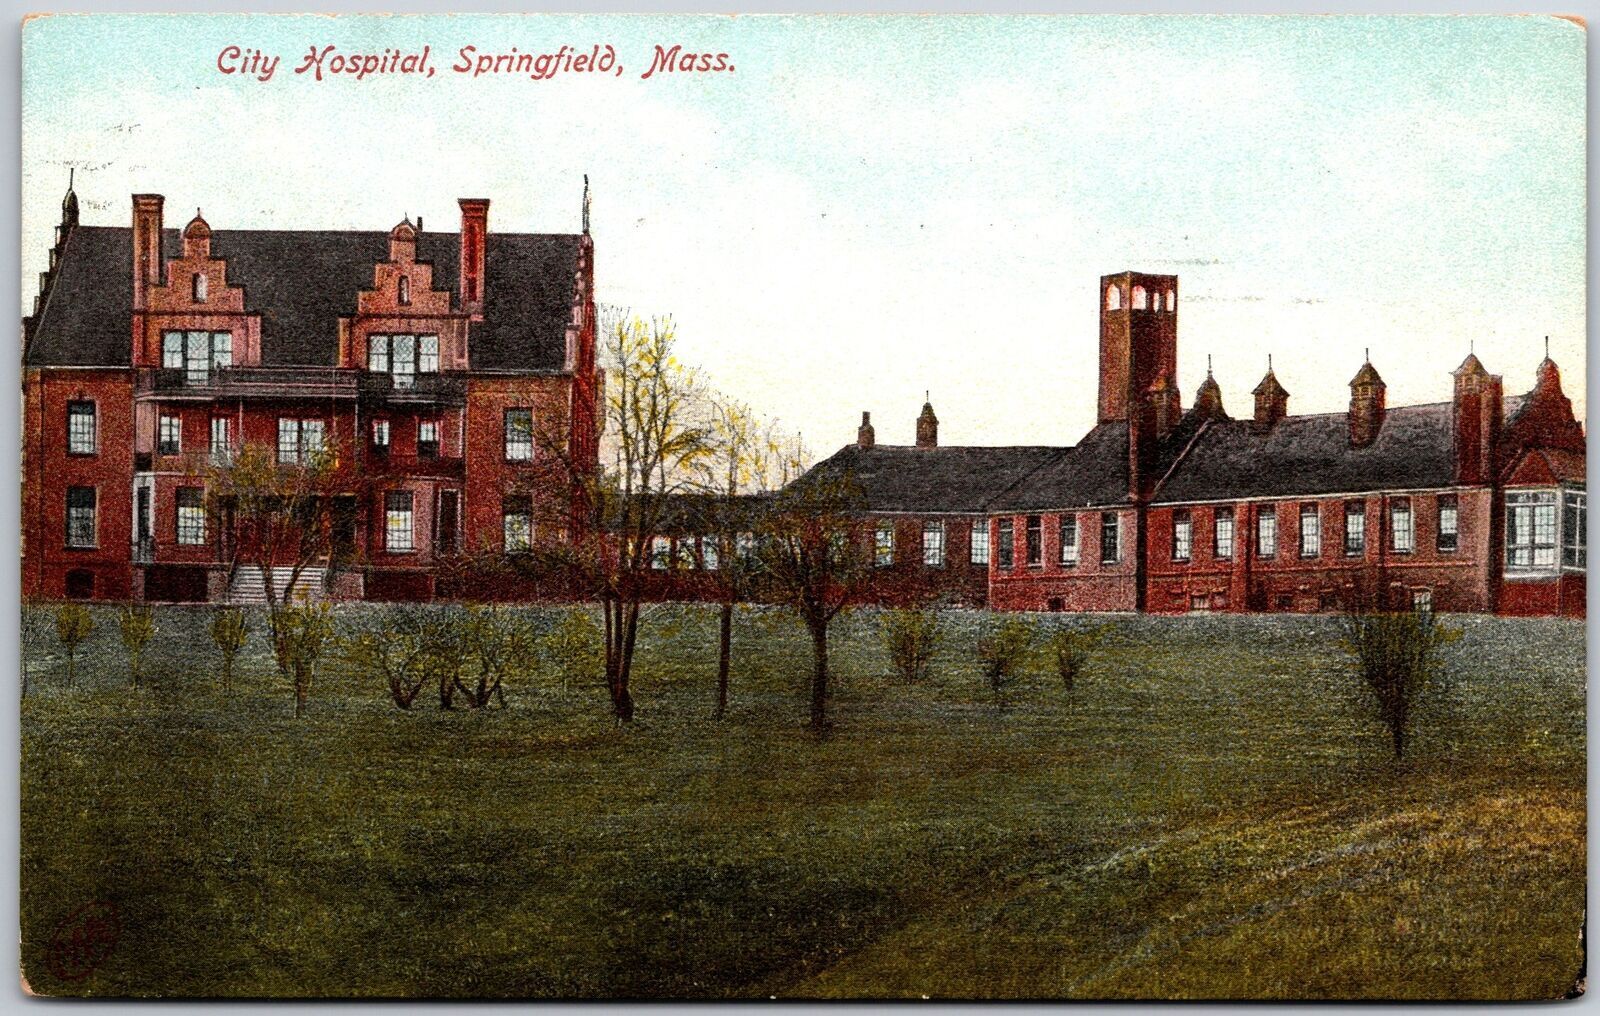 1908 City Hospital Springfield Massachusetts Grounds & Buildings Posted Postcard